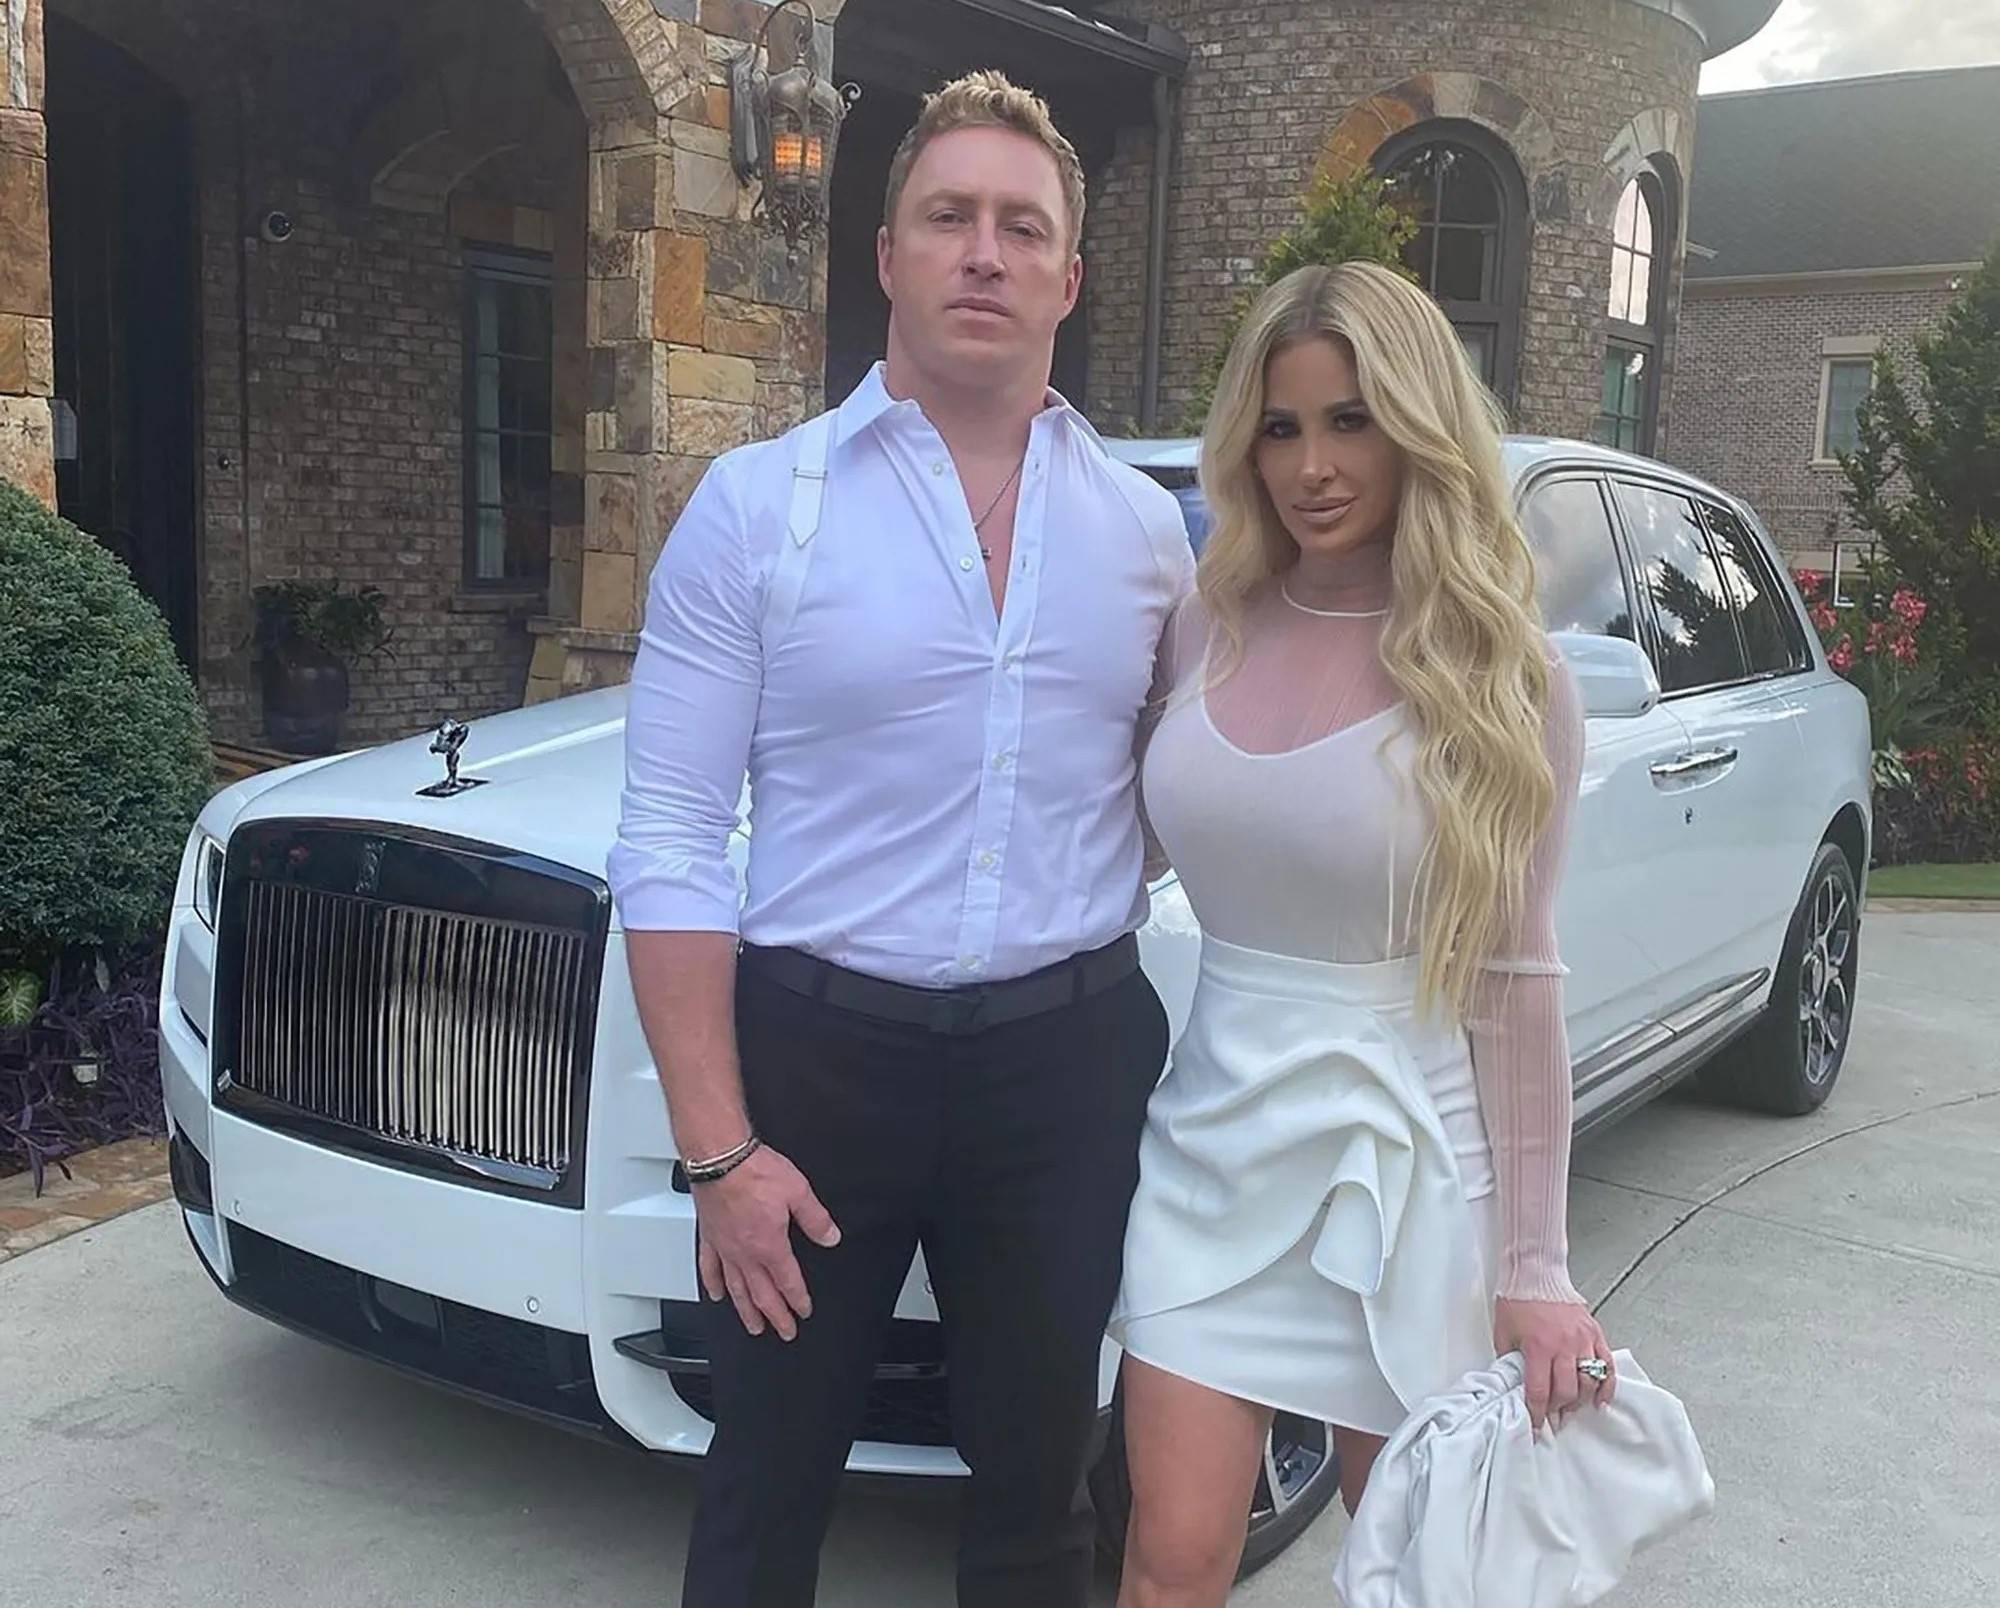 Kroy Biermann Urges Judge To Allow Sale Of Mansion For The Sake Of His Children